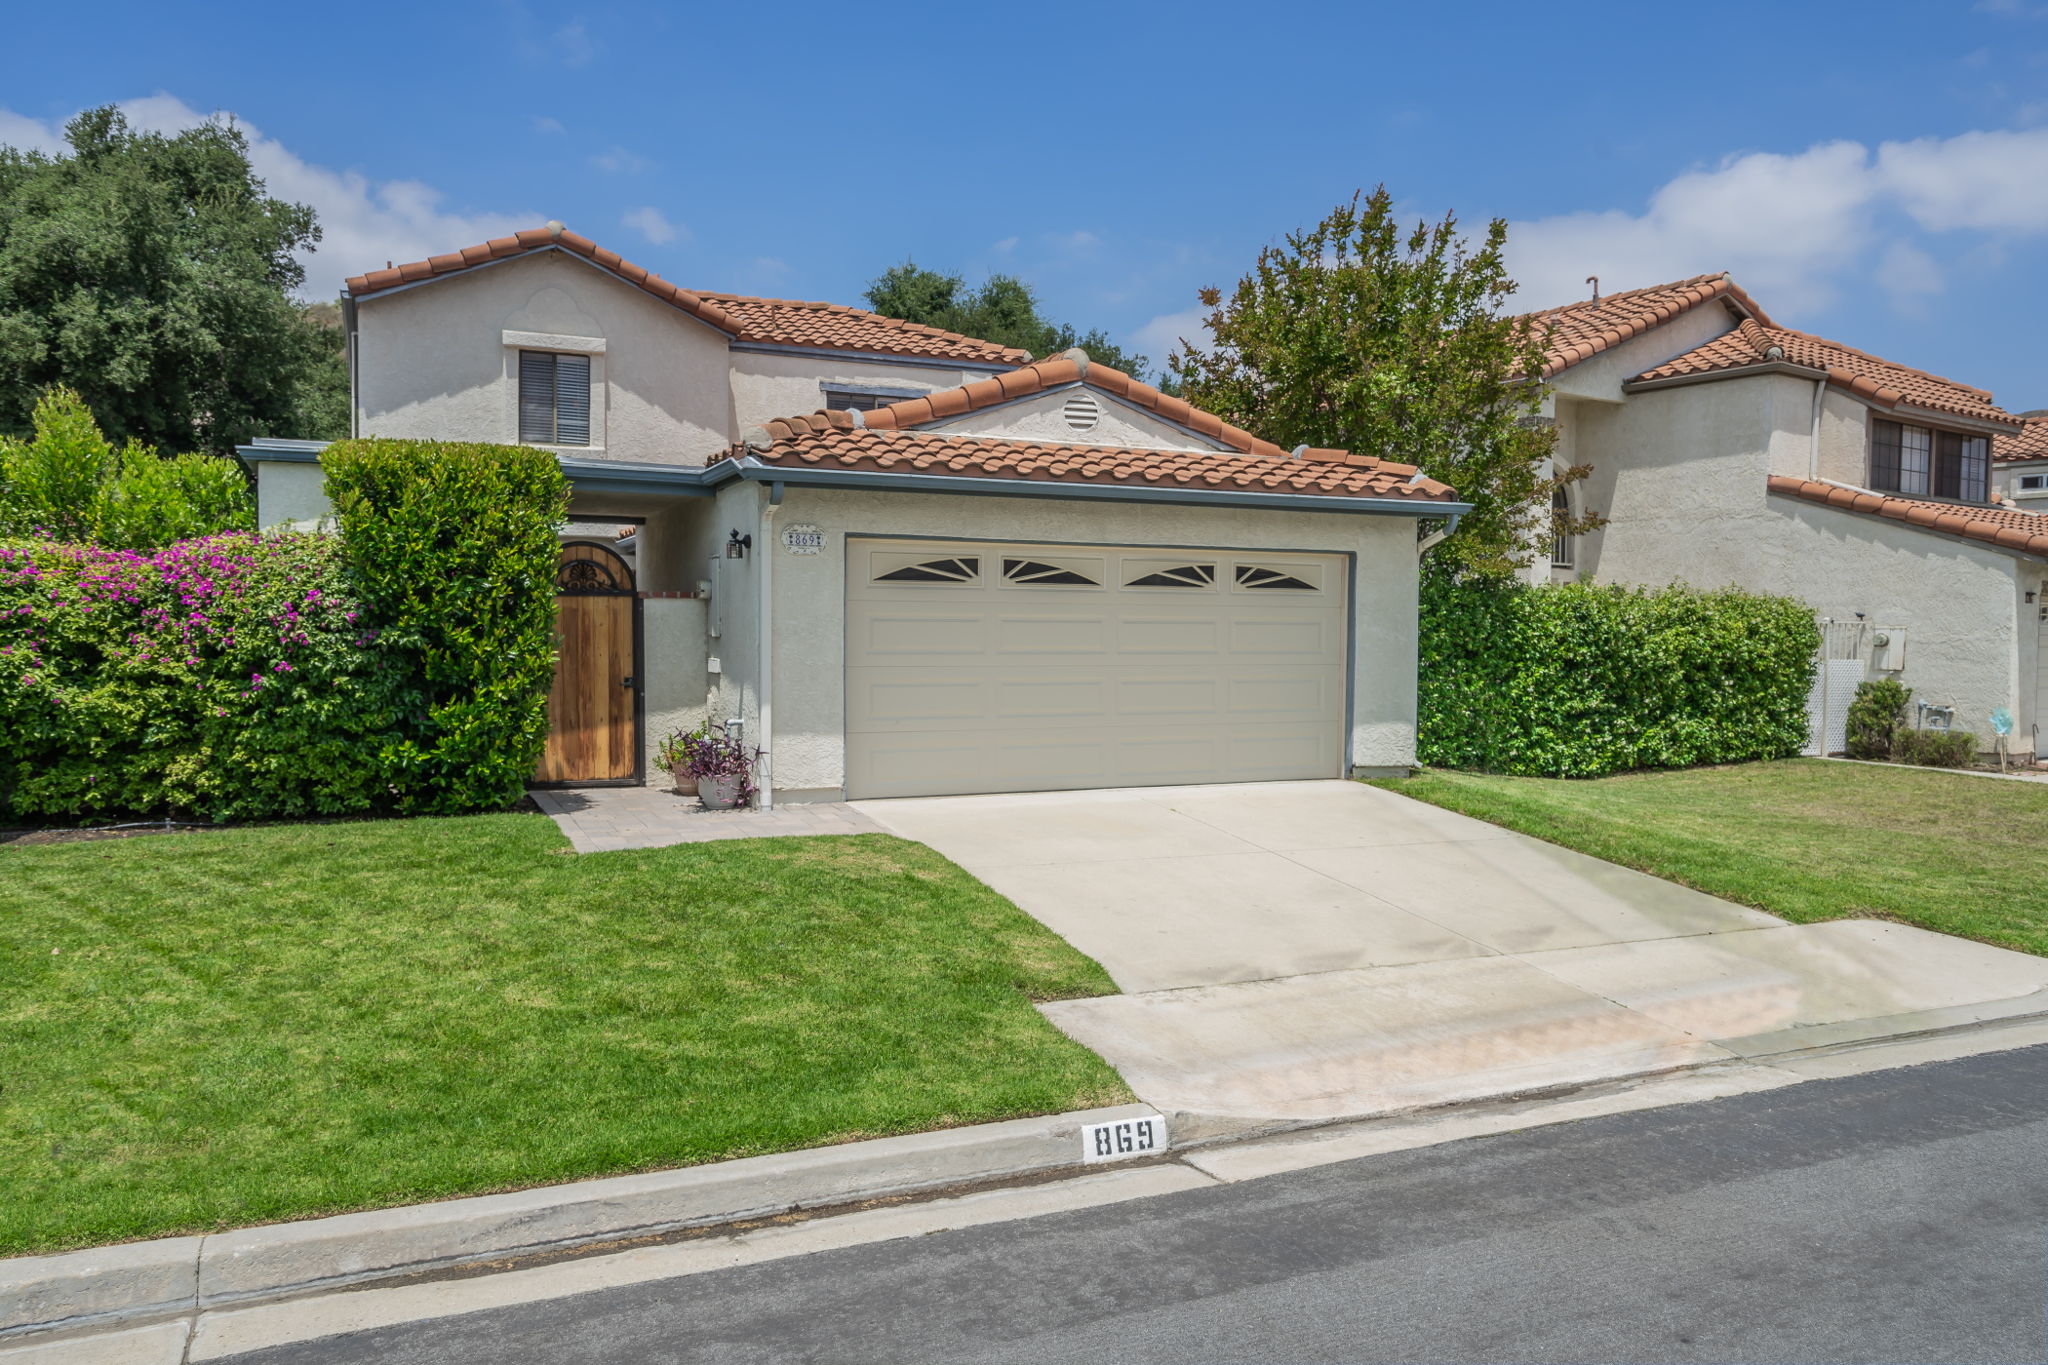  869 Congressional Rd, Simi Valley, CA 93065, US